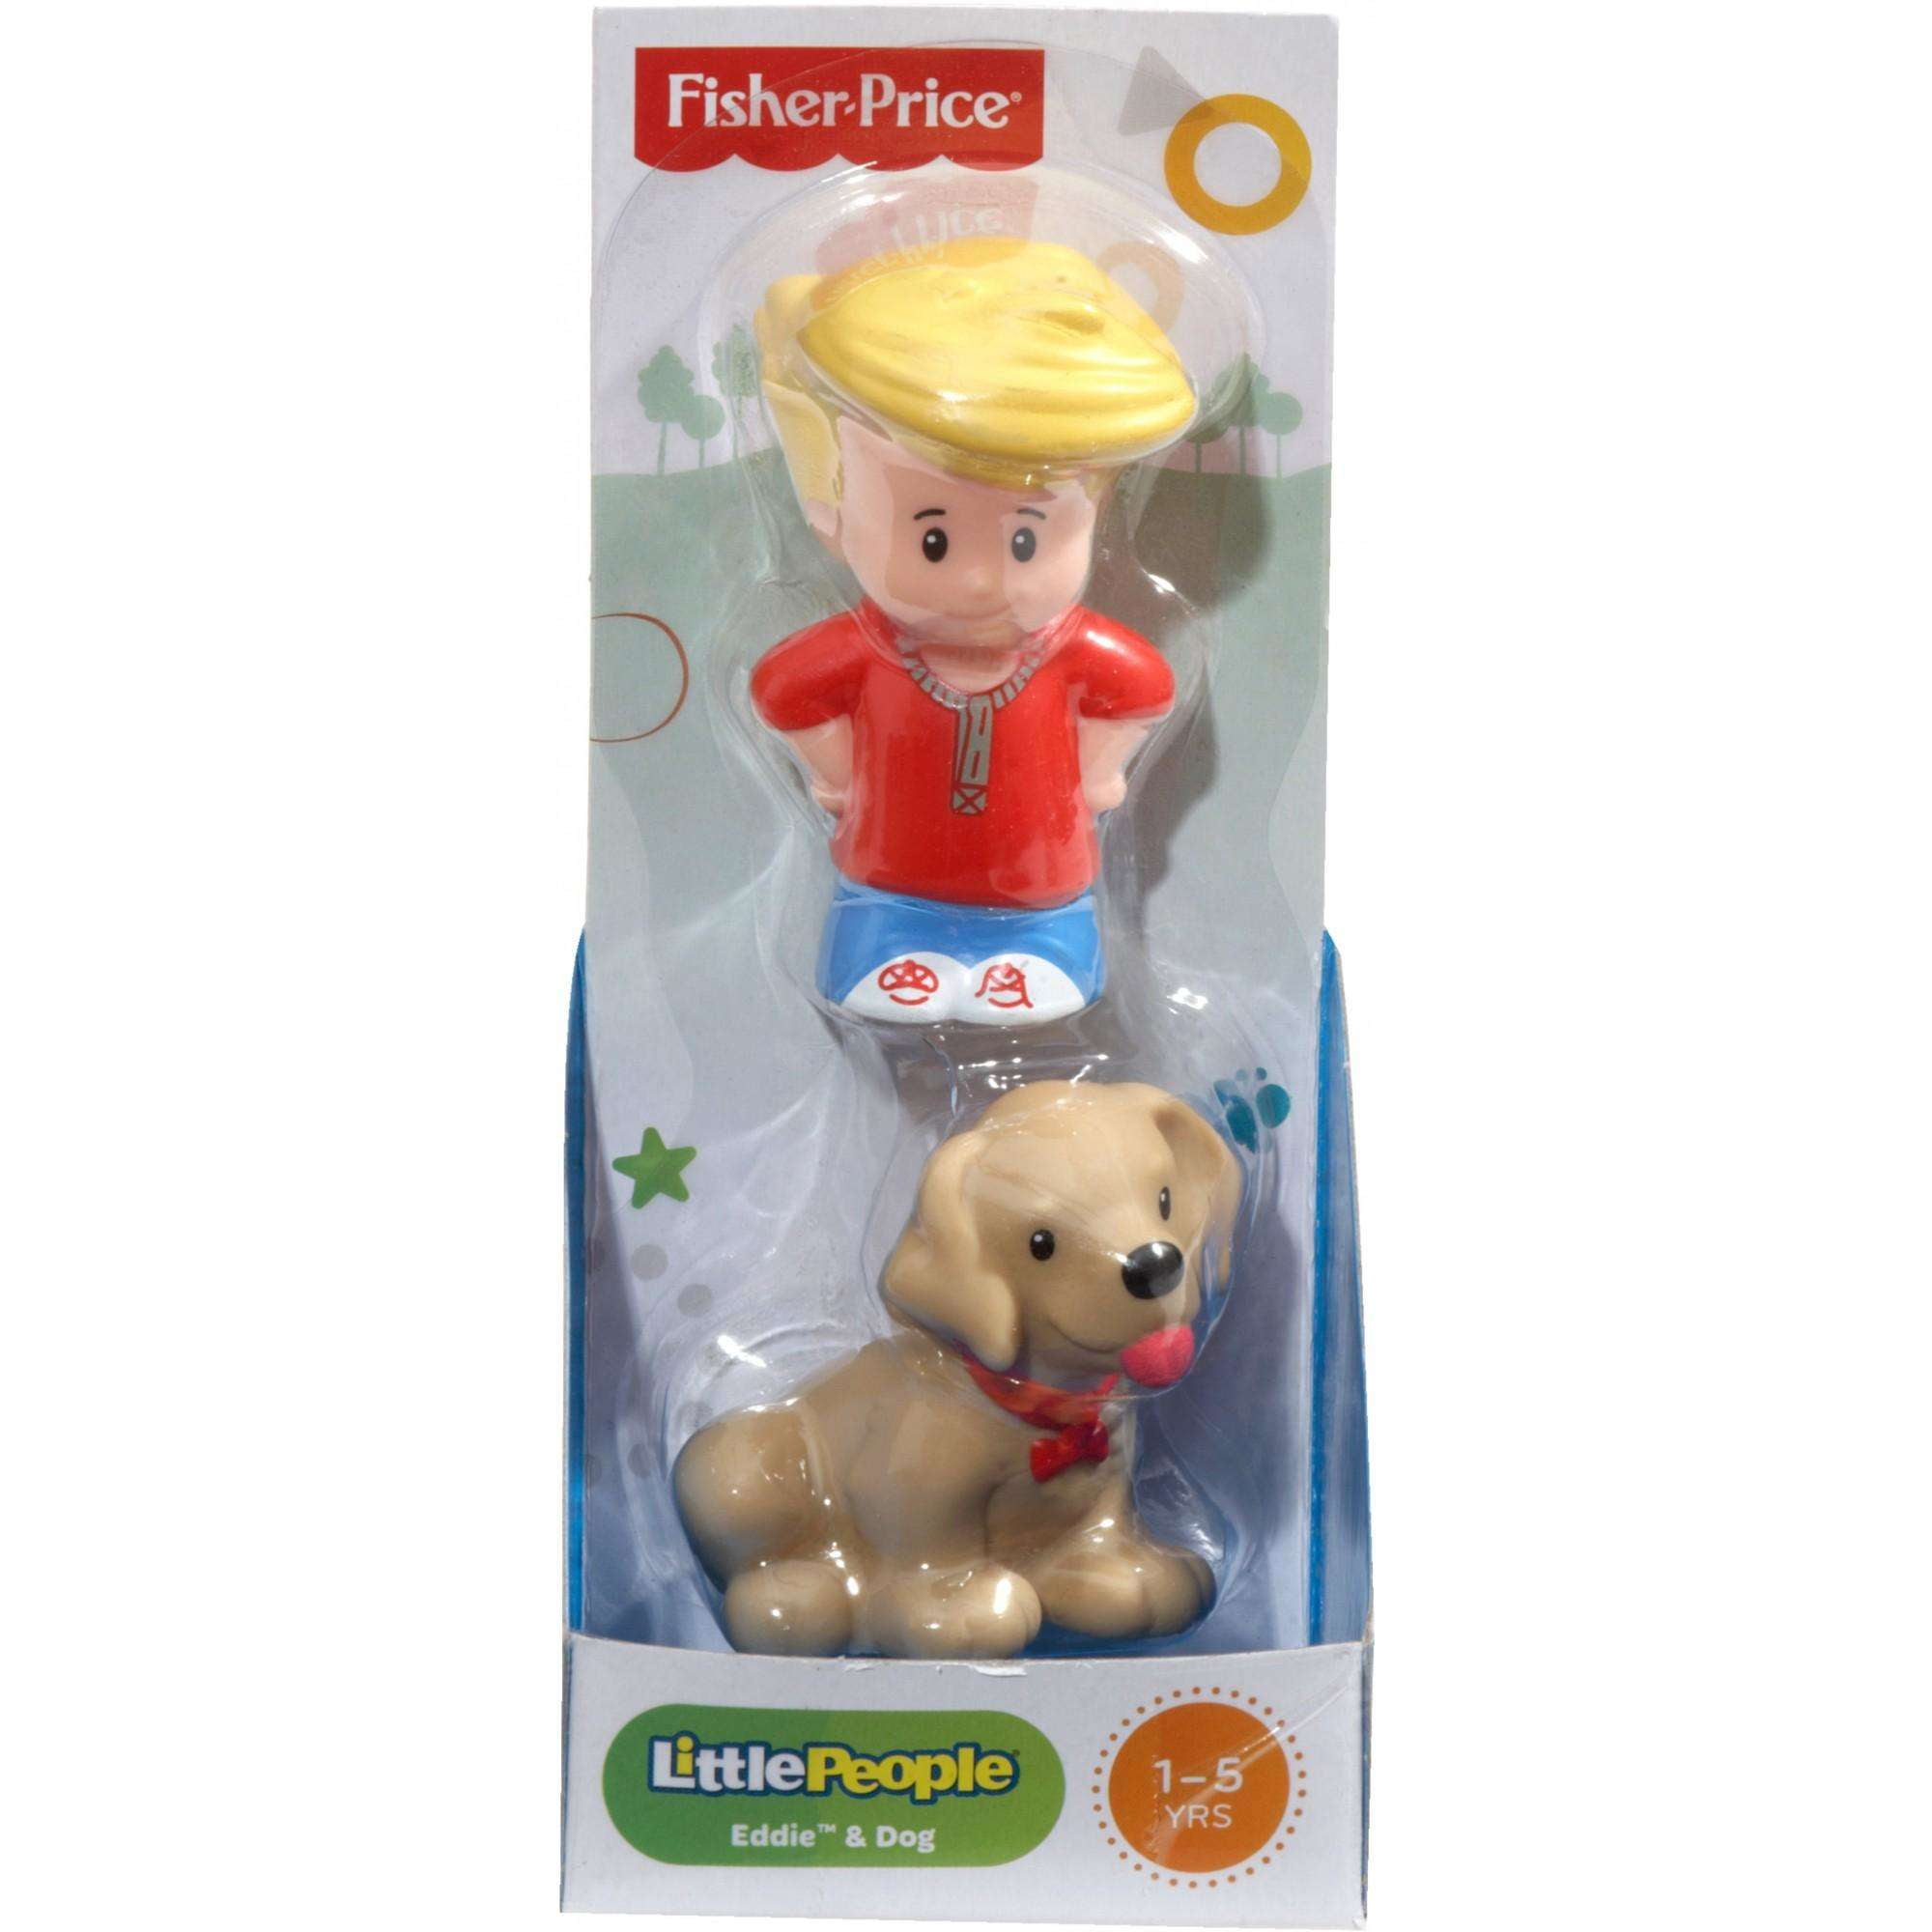 LOT 2 Fisher Price Little People Animal 2 Pack Eddie Dog puppy pet shop toys 